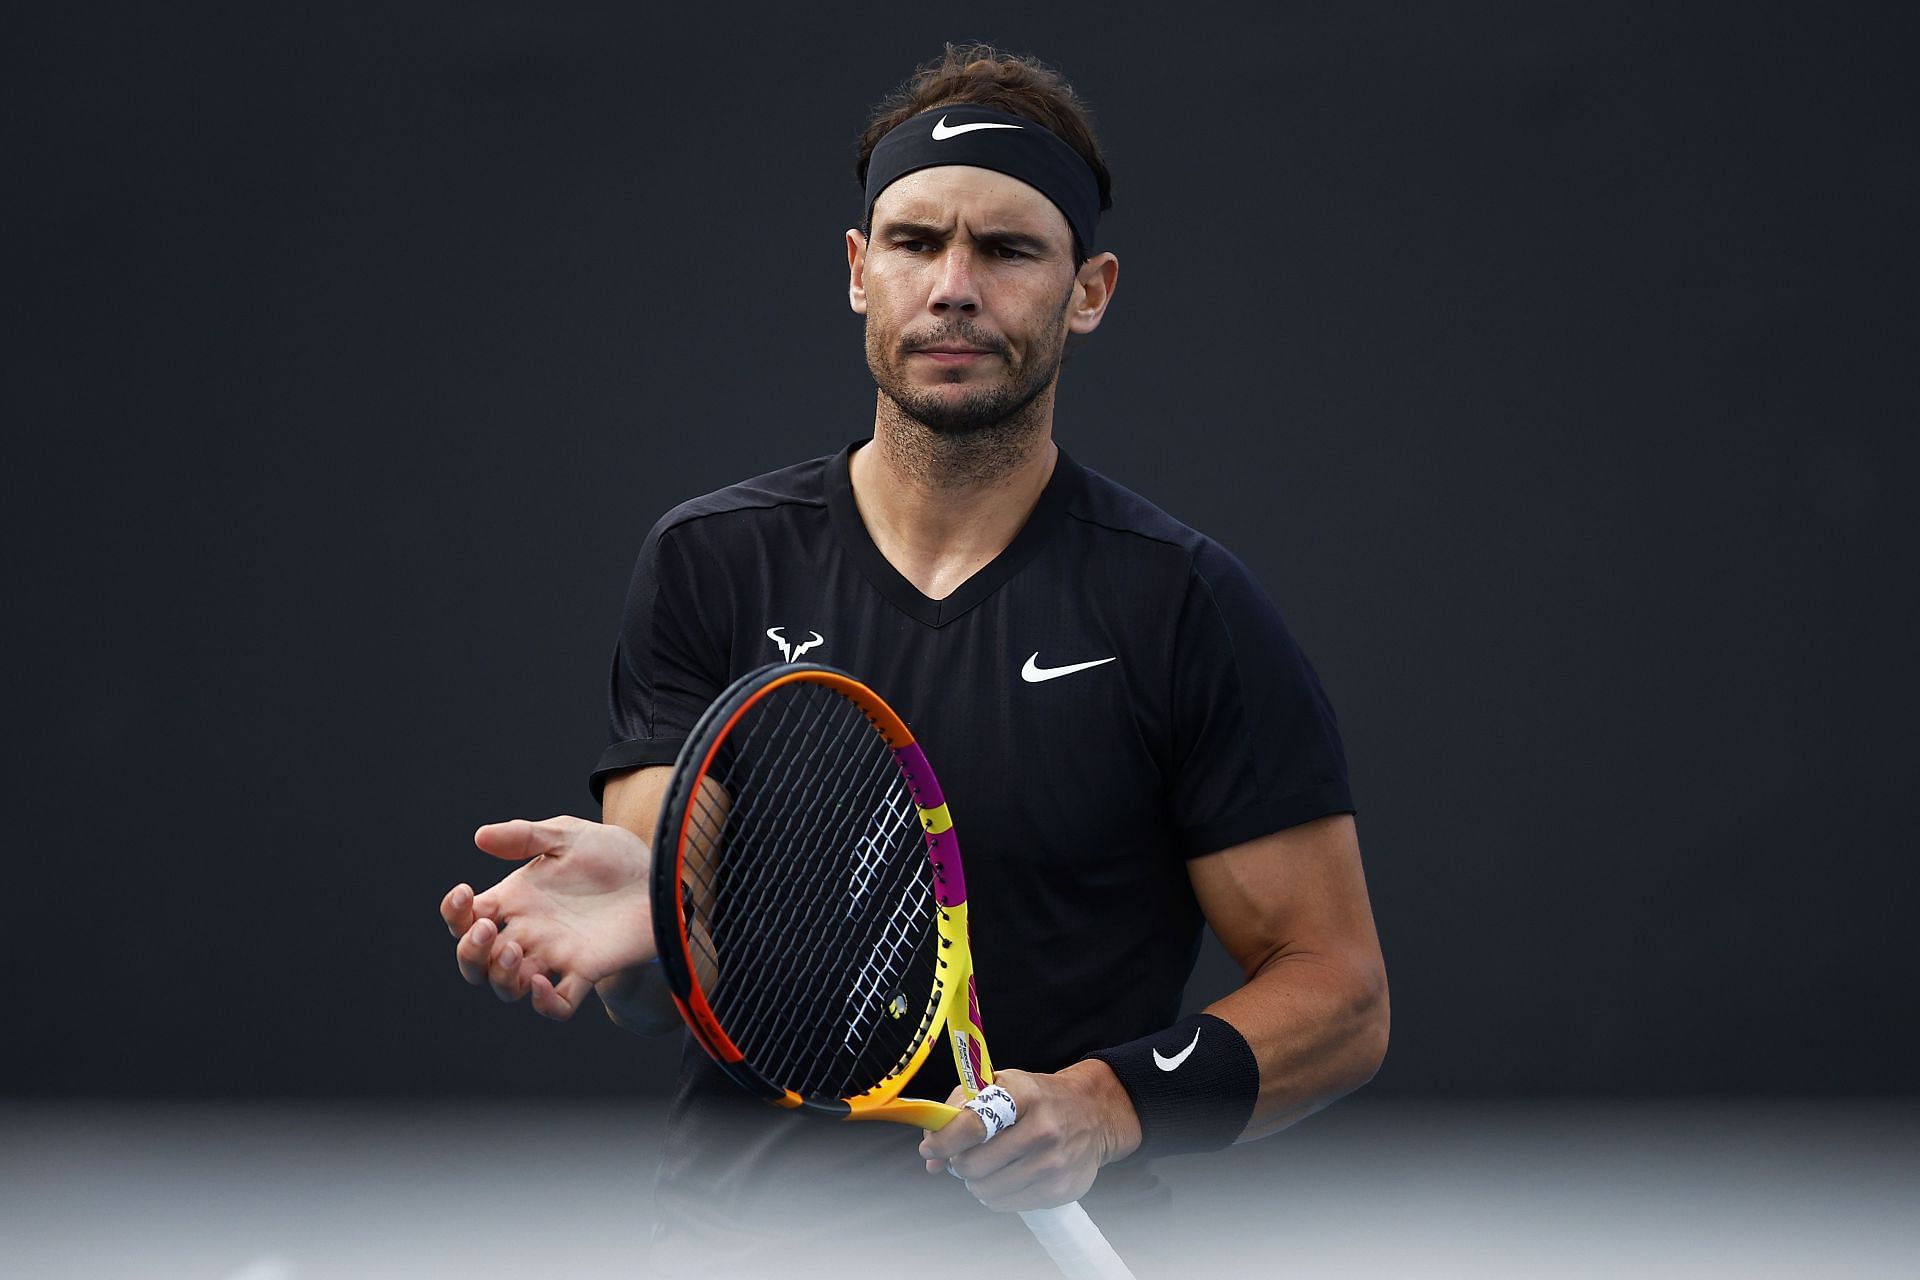 Rafael Nadal, being the No. 1 seed, received a bye into the second round at the Melbourne Summer Set